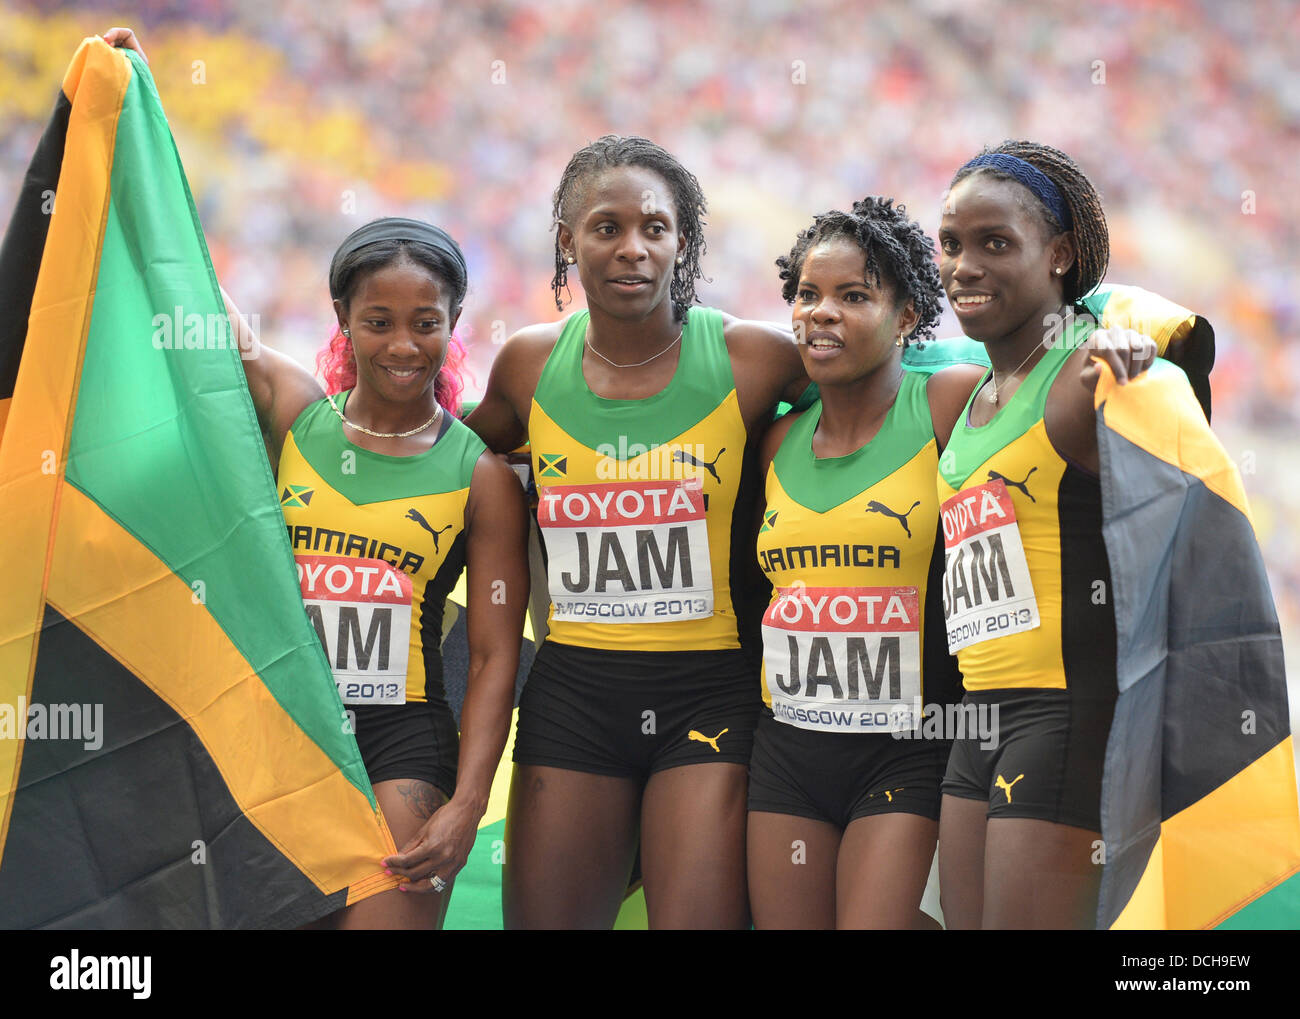 (L-R) Shelly-Ann Fraser-Pryce, Kerron Stewart, Schillonie Calvert and Carrie Russell of Jamaica celebrate after winning the women's 4x100m relay final at the 14th IAAF World Championships in Athletics at Luzhniki Stadium in Moscow, Russia, 18 August 2013. Photo: Bernd Thissen/dpa +++(c) dpa - Bildfunk+++ Stock Photo